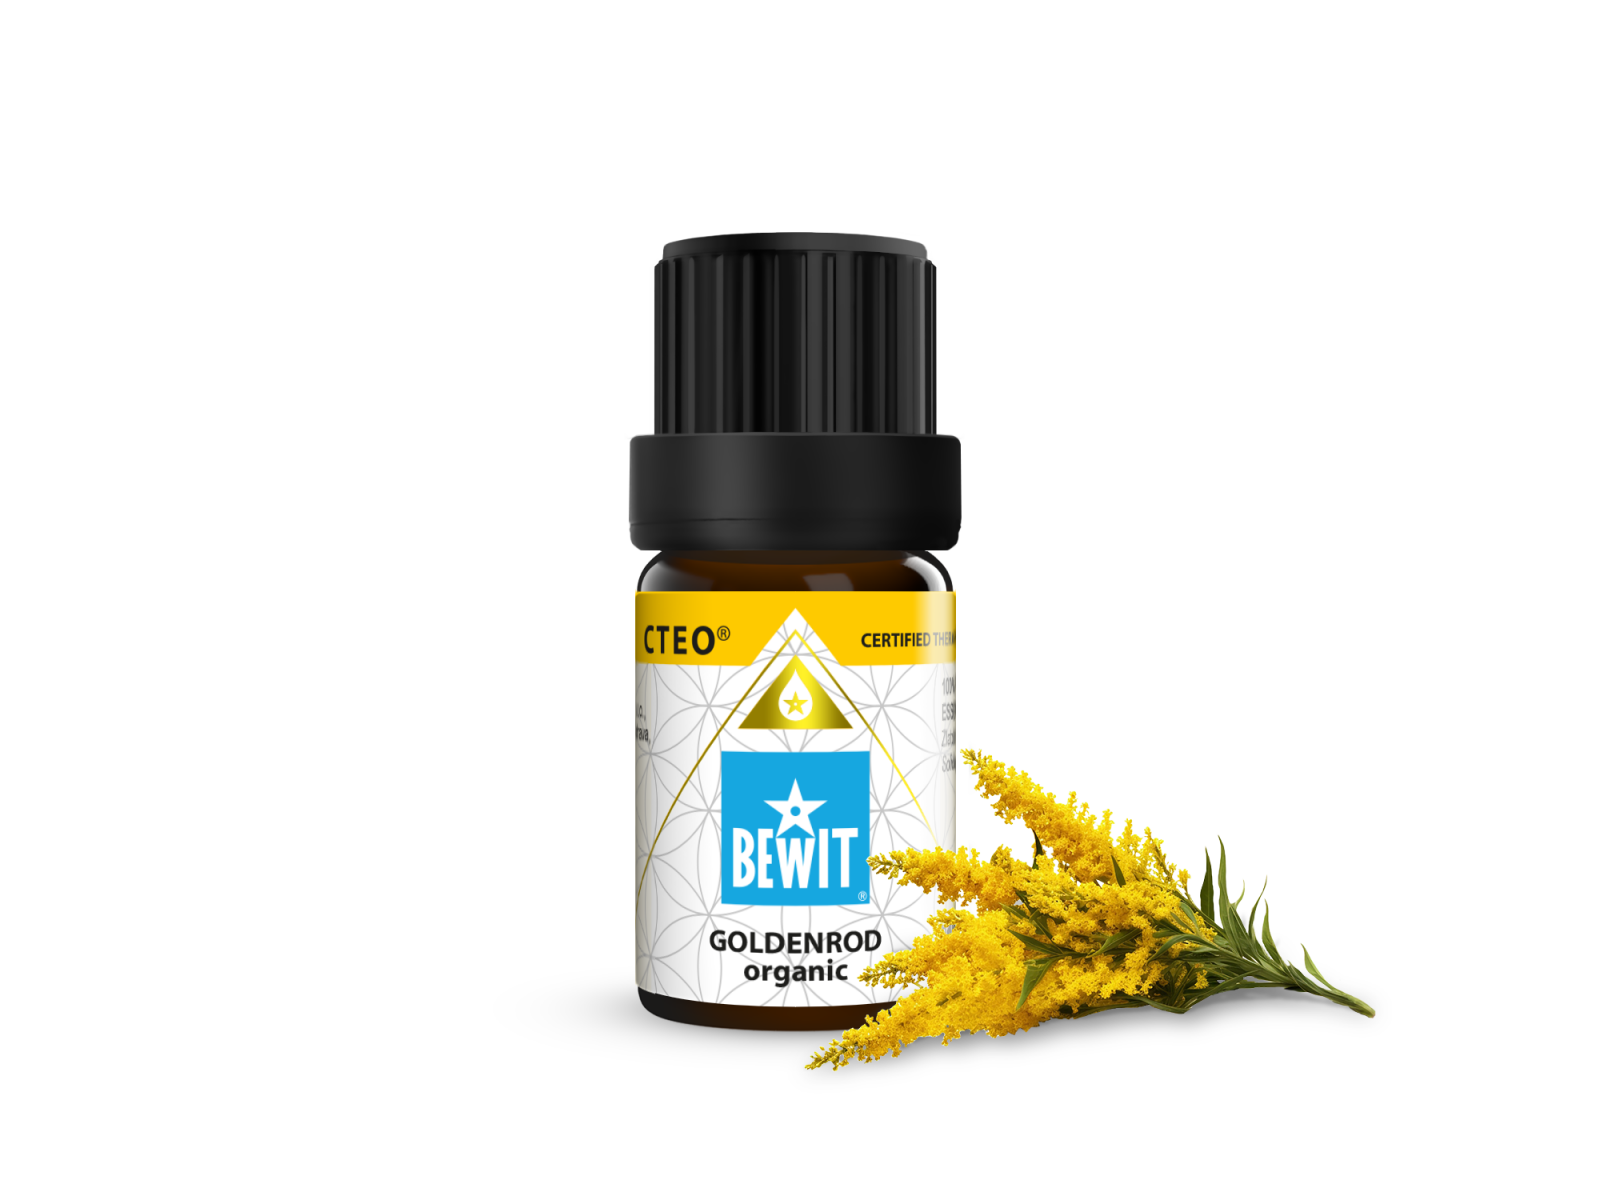 BEWIT Canadian goldenrod ORGANIC - 100% pure and natural CTEO® essential oil - 2